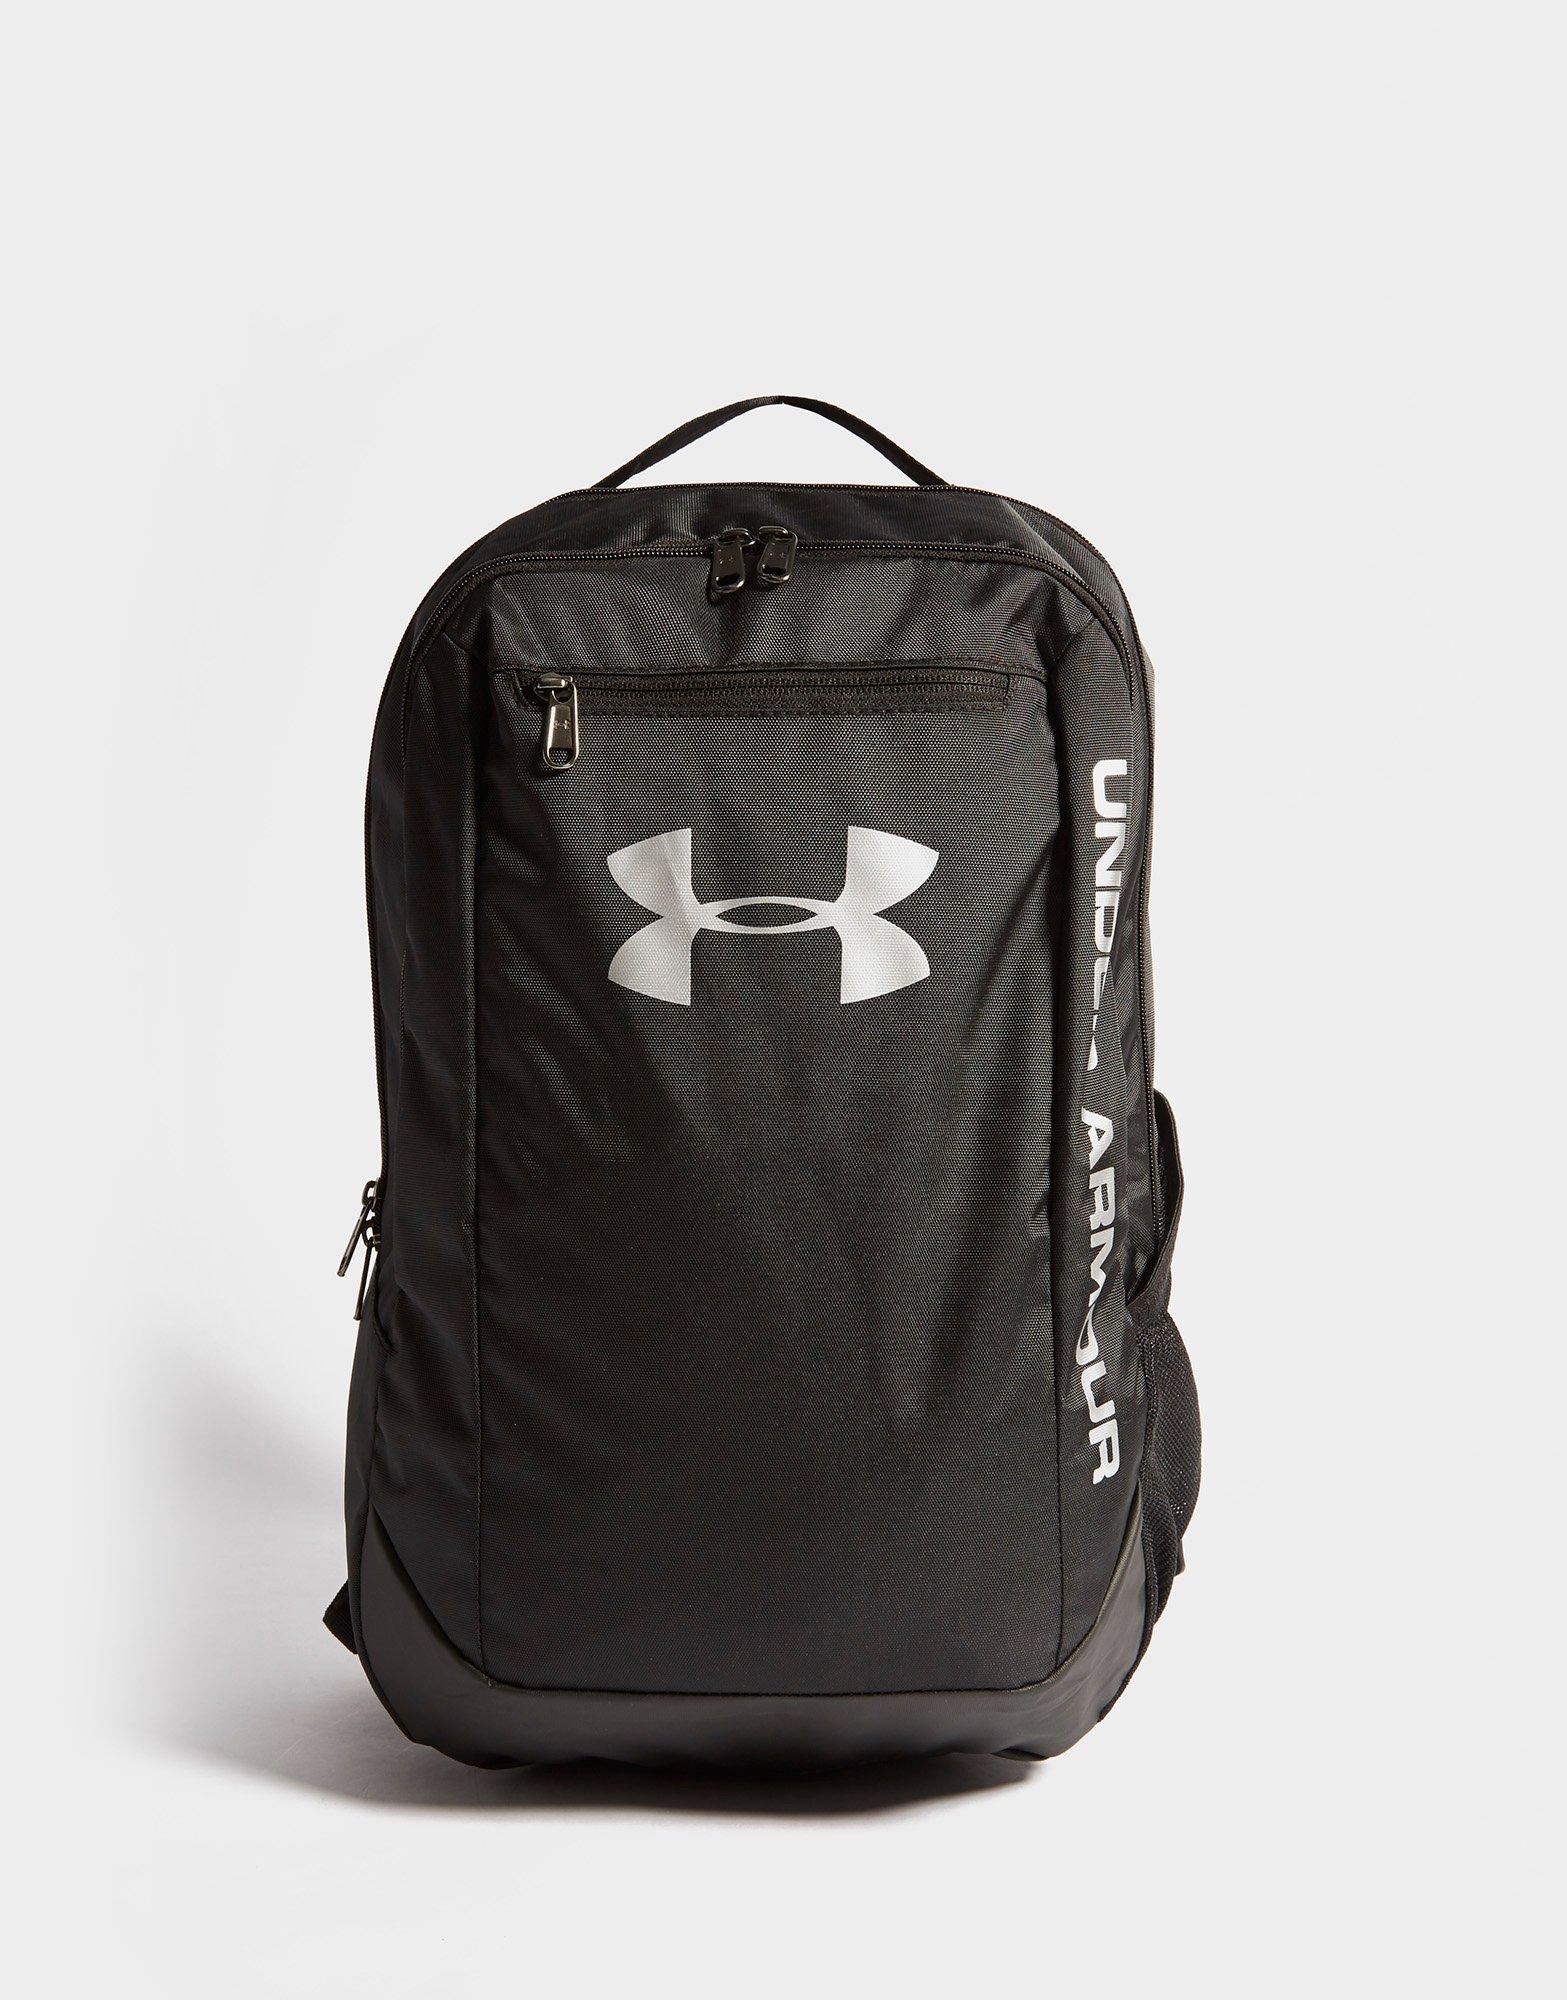 storm under armour backpack